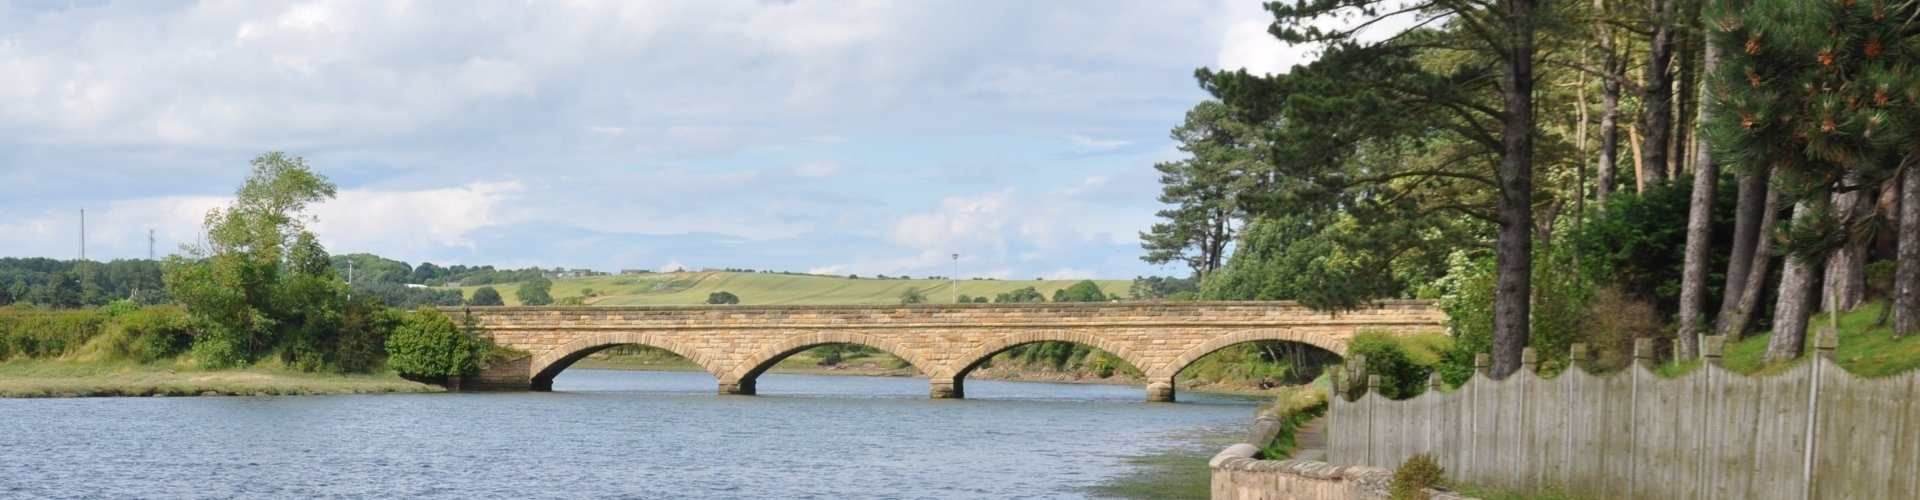 View of the Duchess Bridge over the River Aln